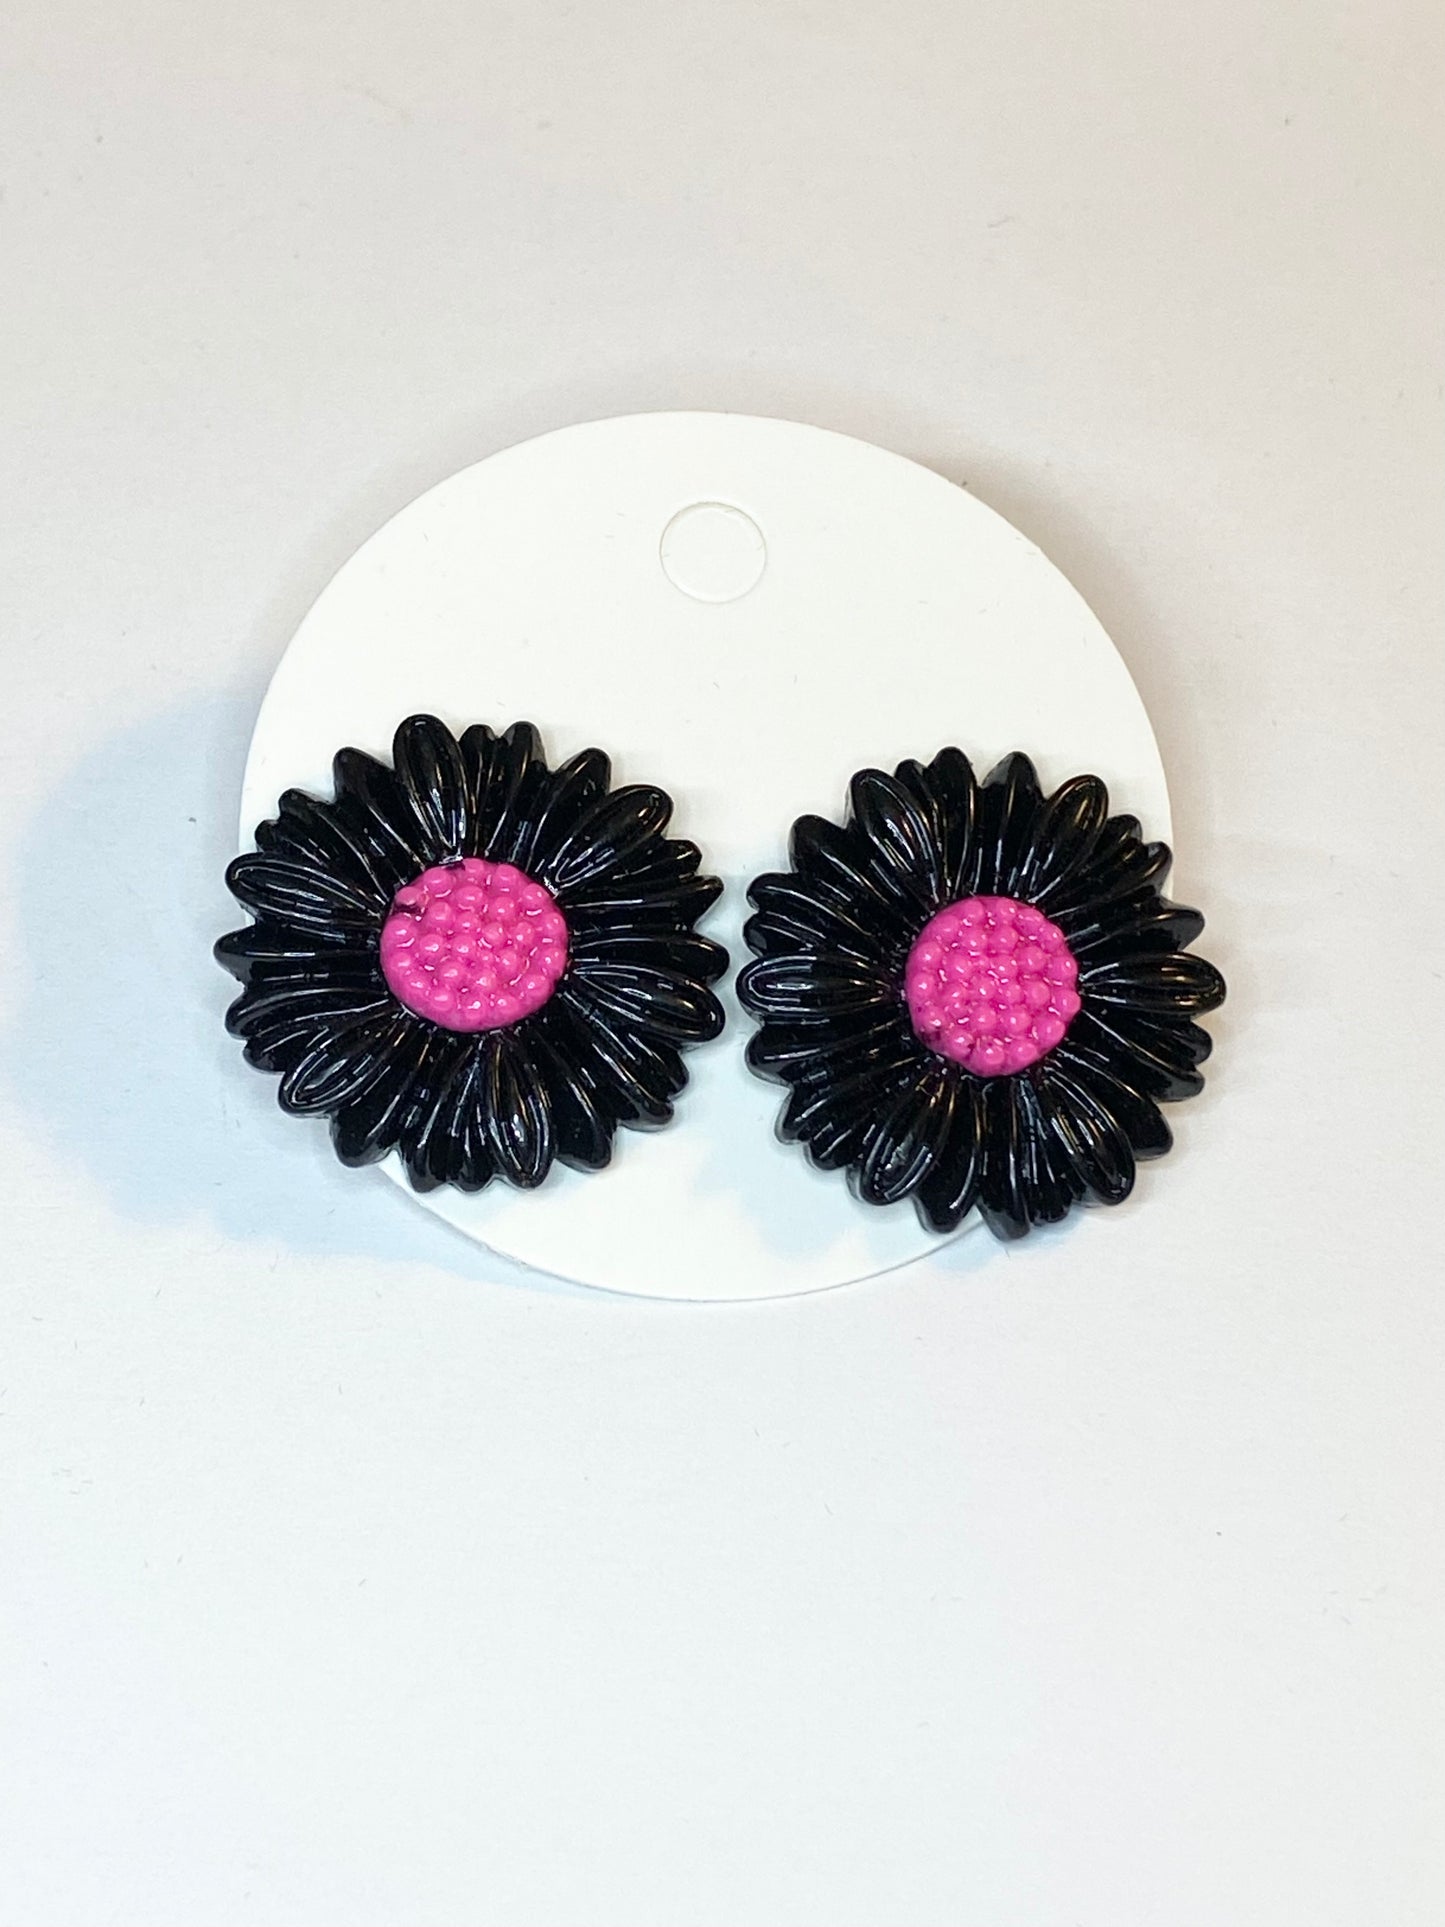 Black and Pink Daisy Earrings